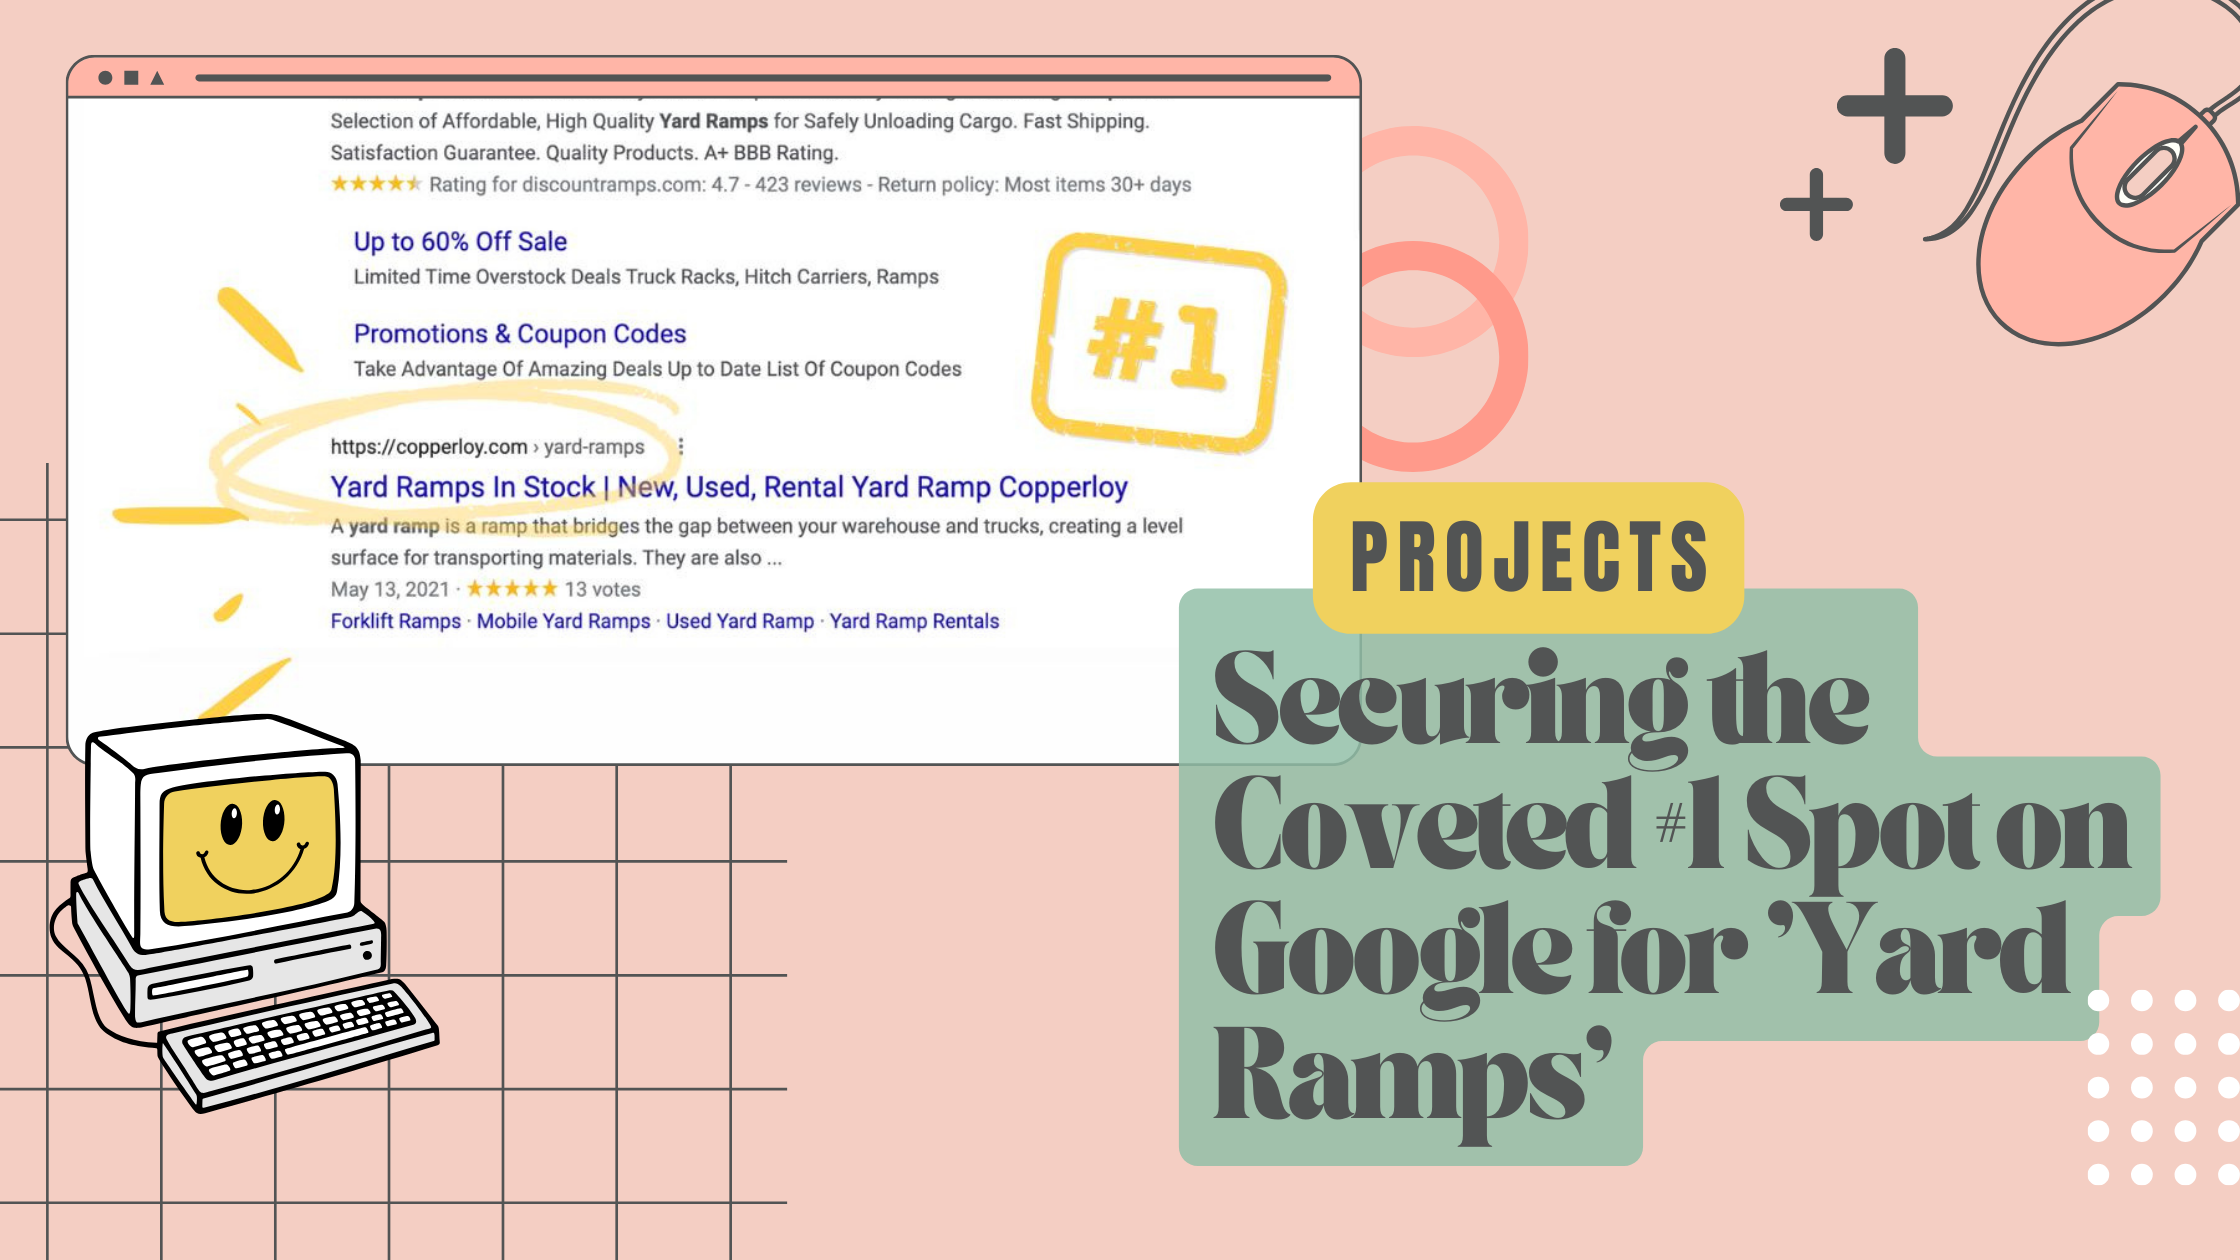 Project cover for securing the #1 spot in Google for Yard Ramps